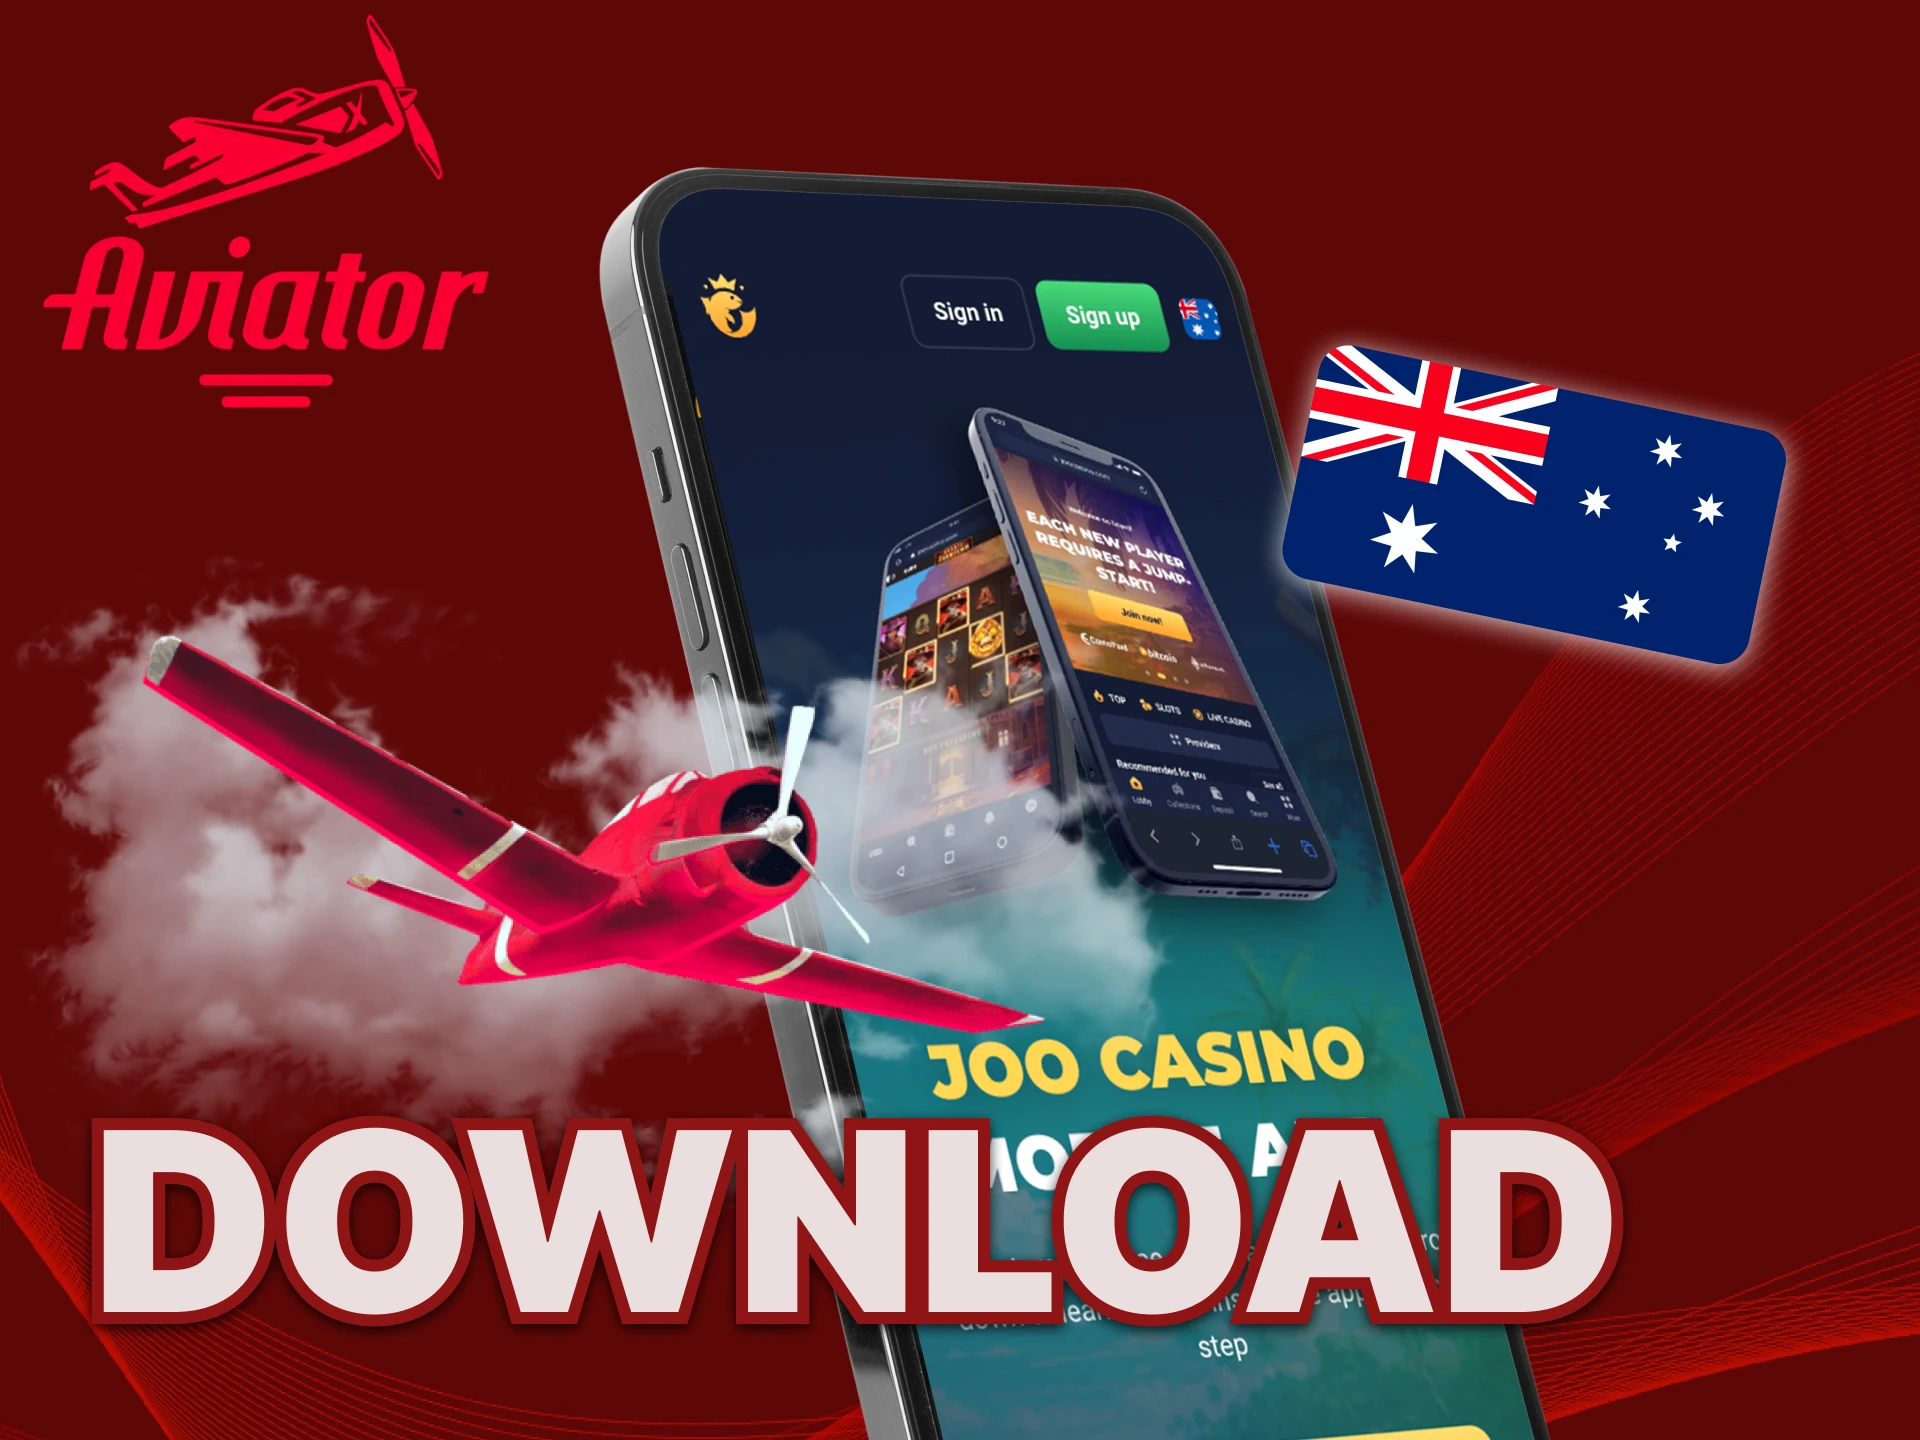 How to download aviator apps in Australia.